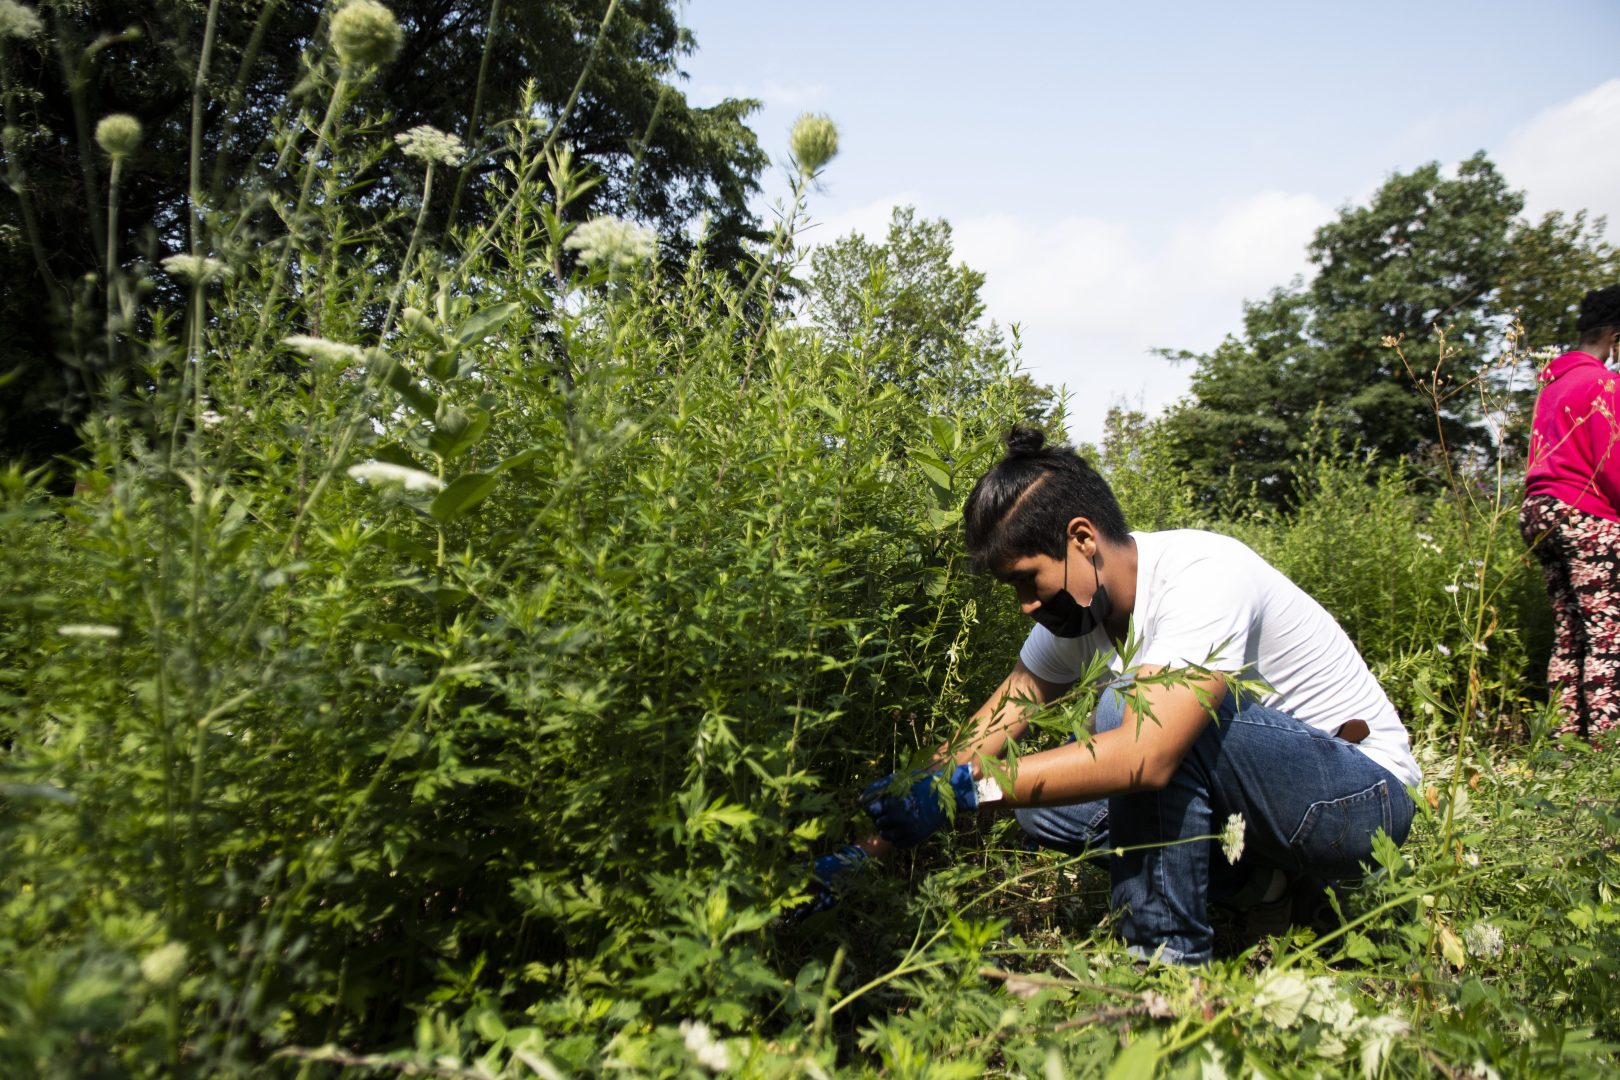 A Teen Corps member works to remove Mugwort from the Pollinator Meadow